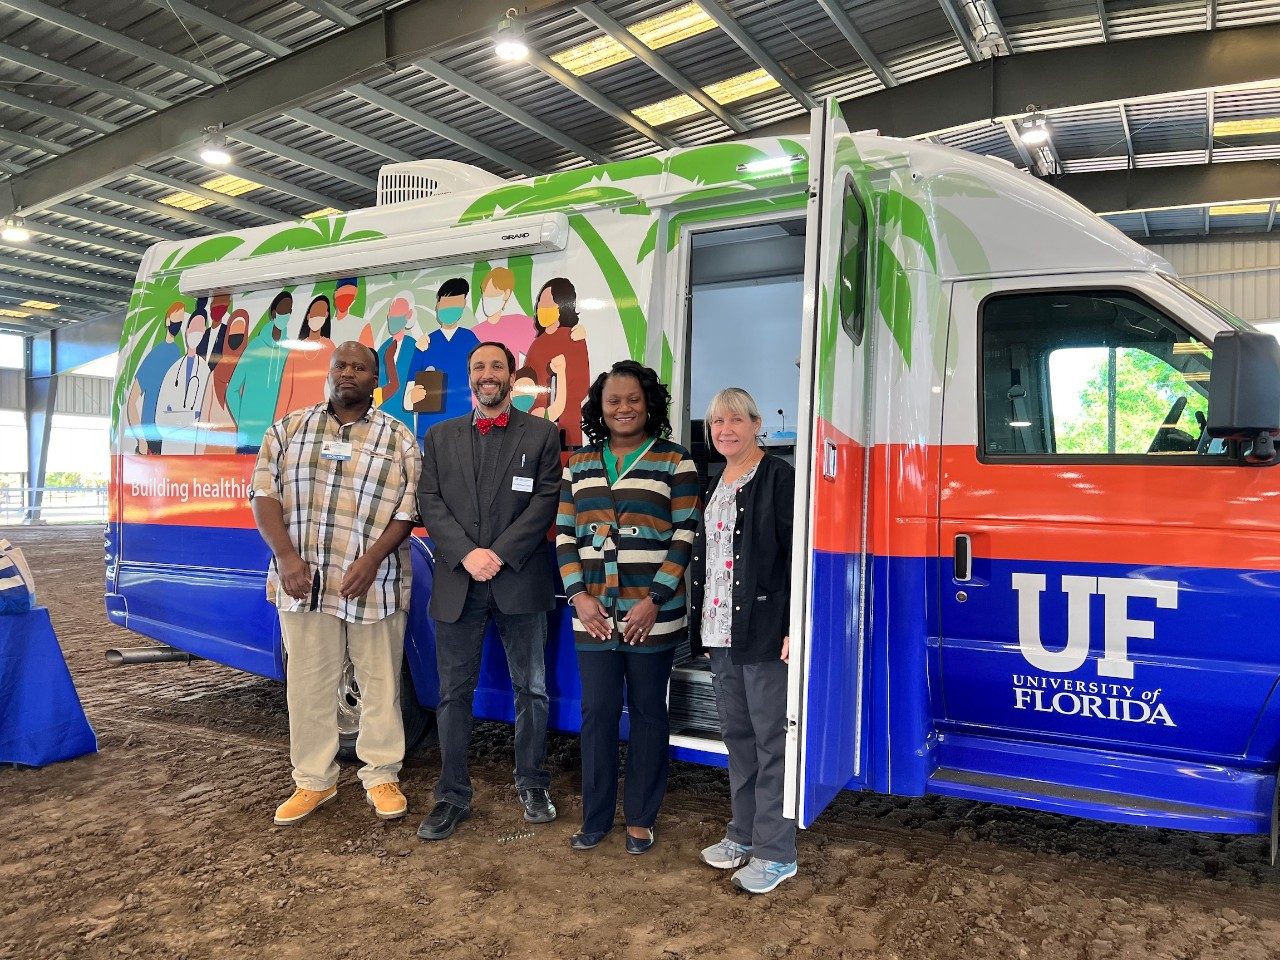 Gutter and LaToya O’Neal with colleagues from University of Florida Health in front of the new Extension Mobile Health Vehicle at an immunization event